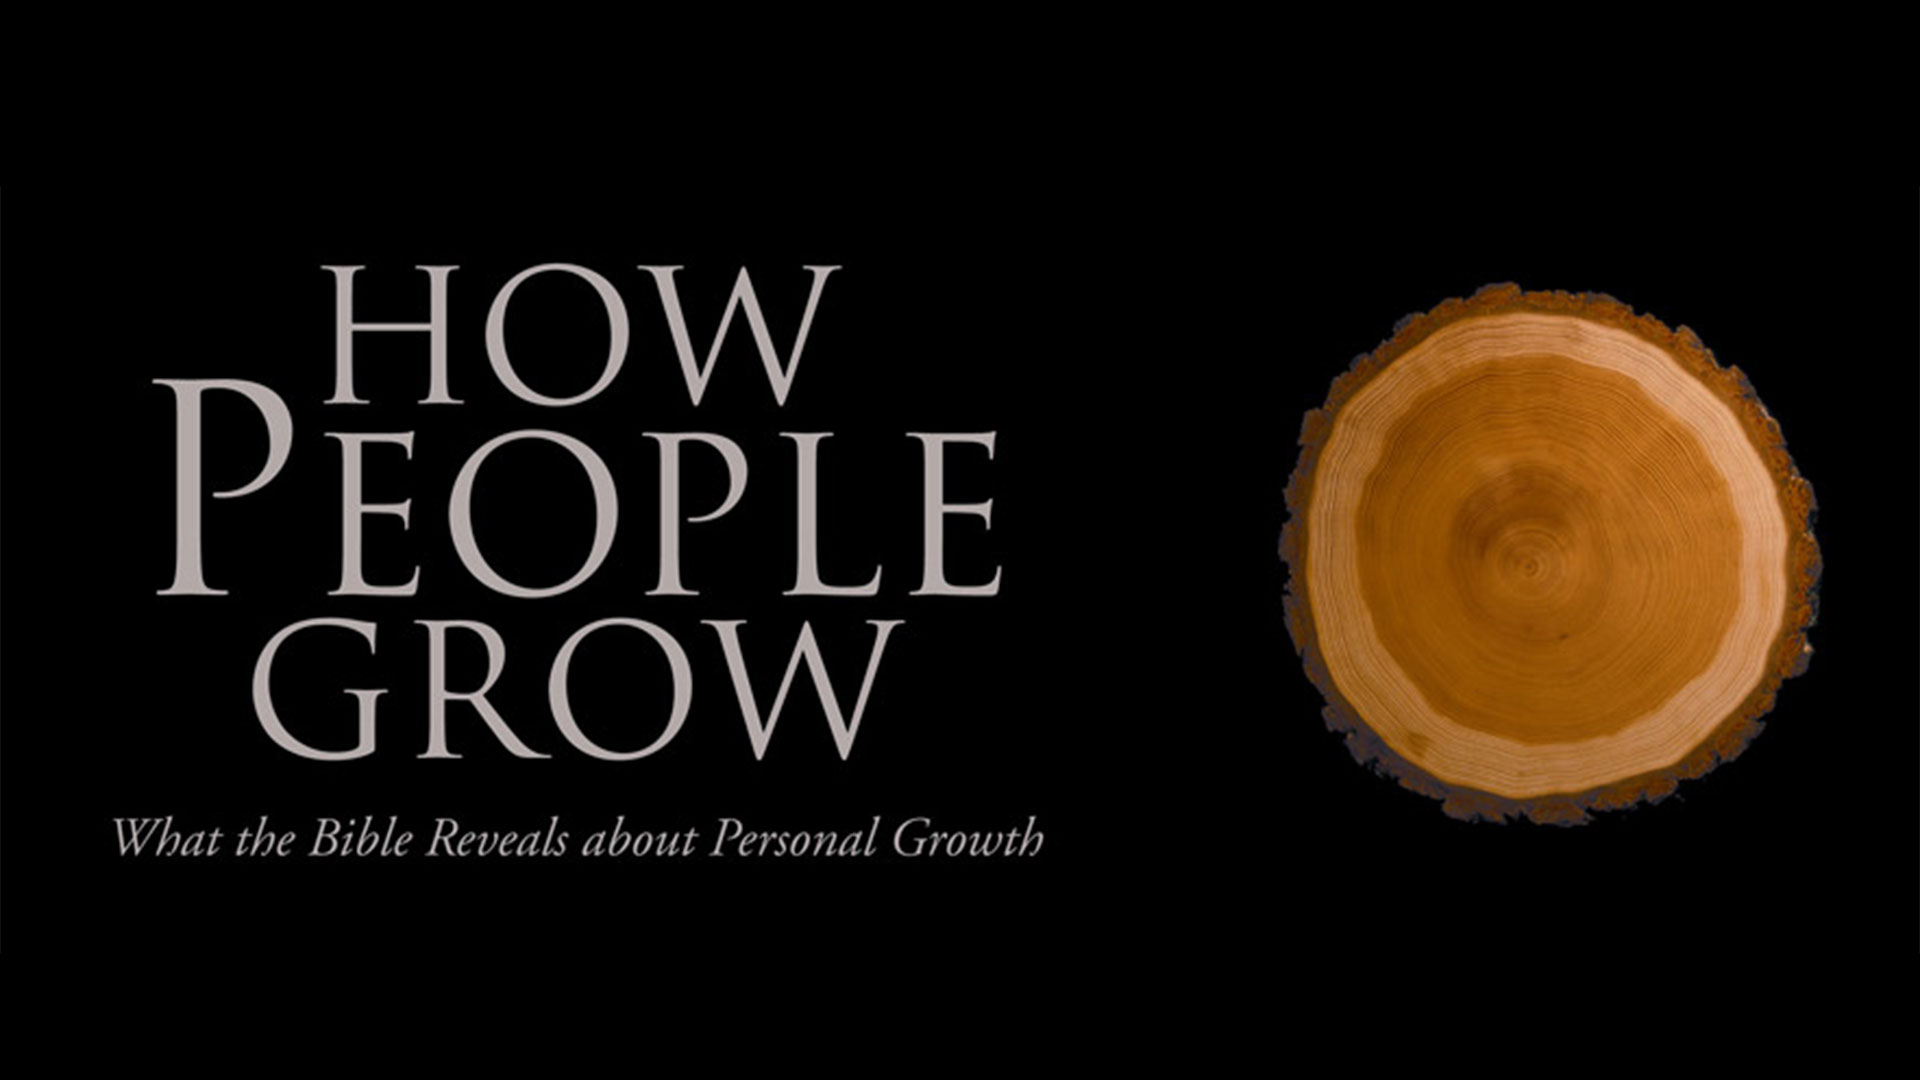 How People Grow by Henry Cloud and John Townsend